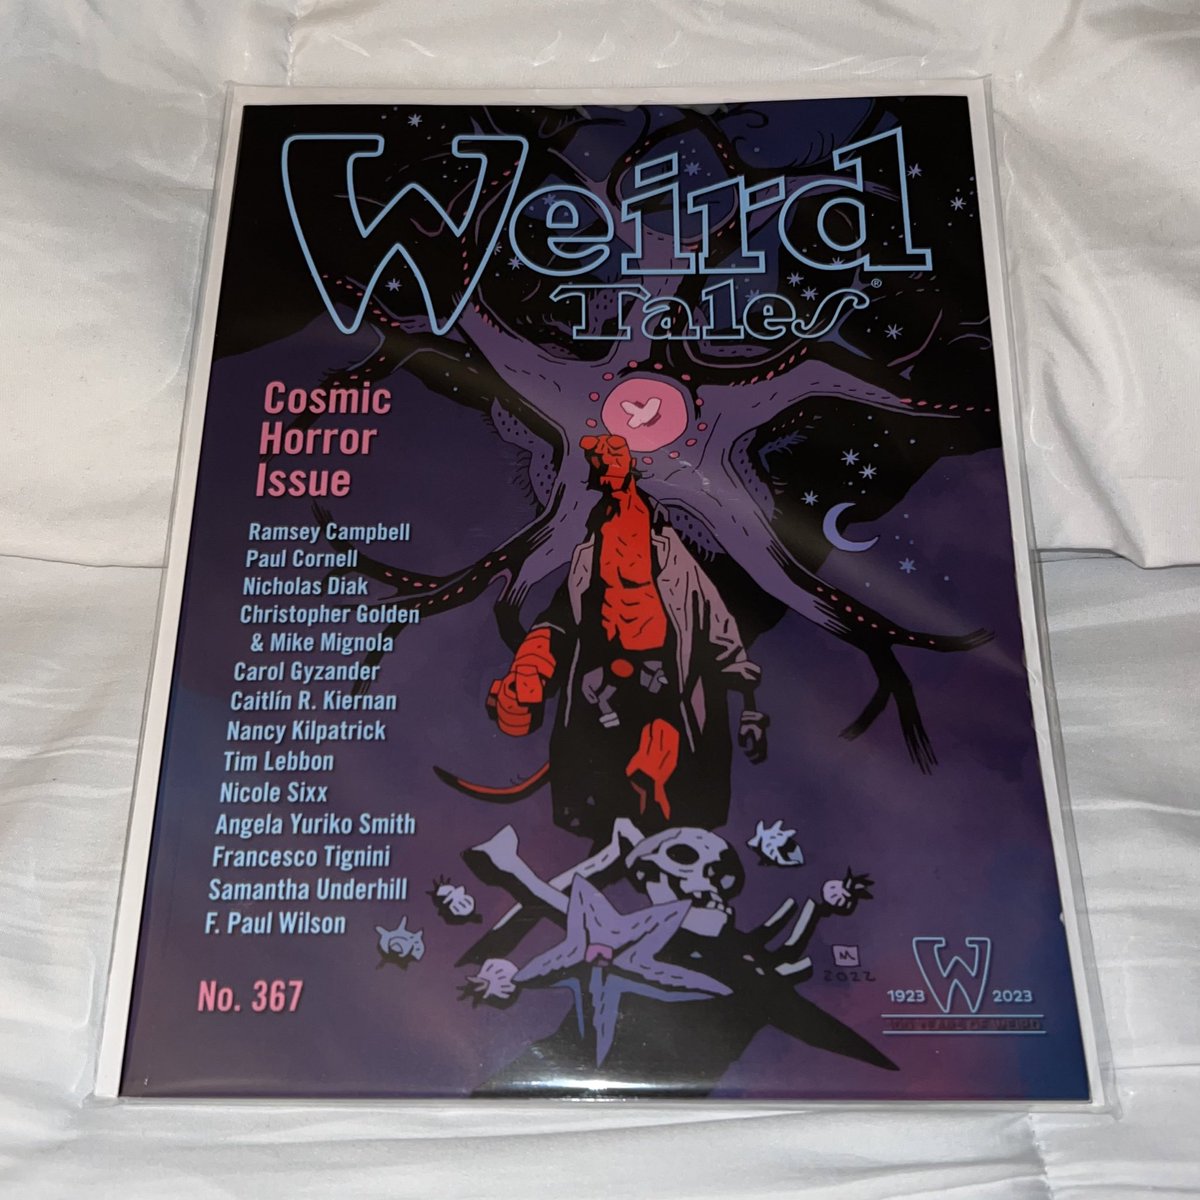 My copy of @weirdtales with Hellboy on the cover done by @artofmmignola had arrived today! I love it! The story that Mike and @ChristophGolden done is also awesome. I loved reading it! 

#hellboy #weirdtales #mikemignola #bprd